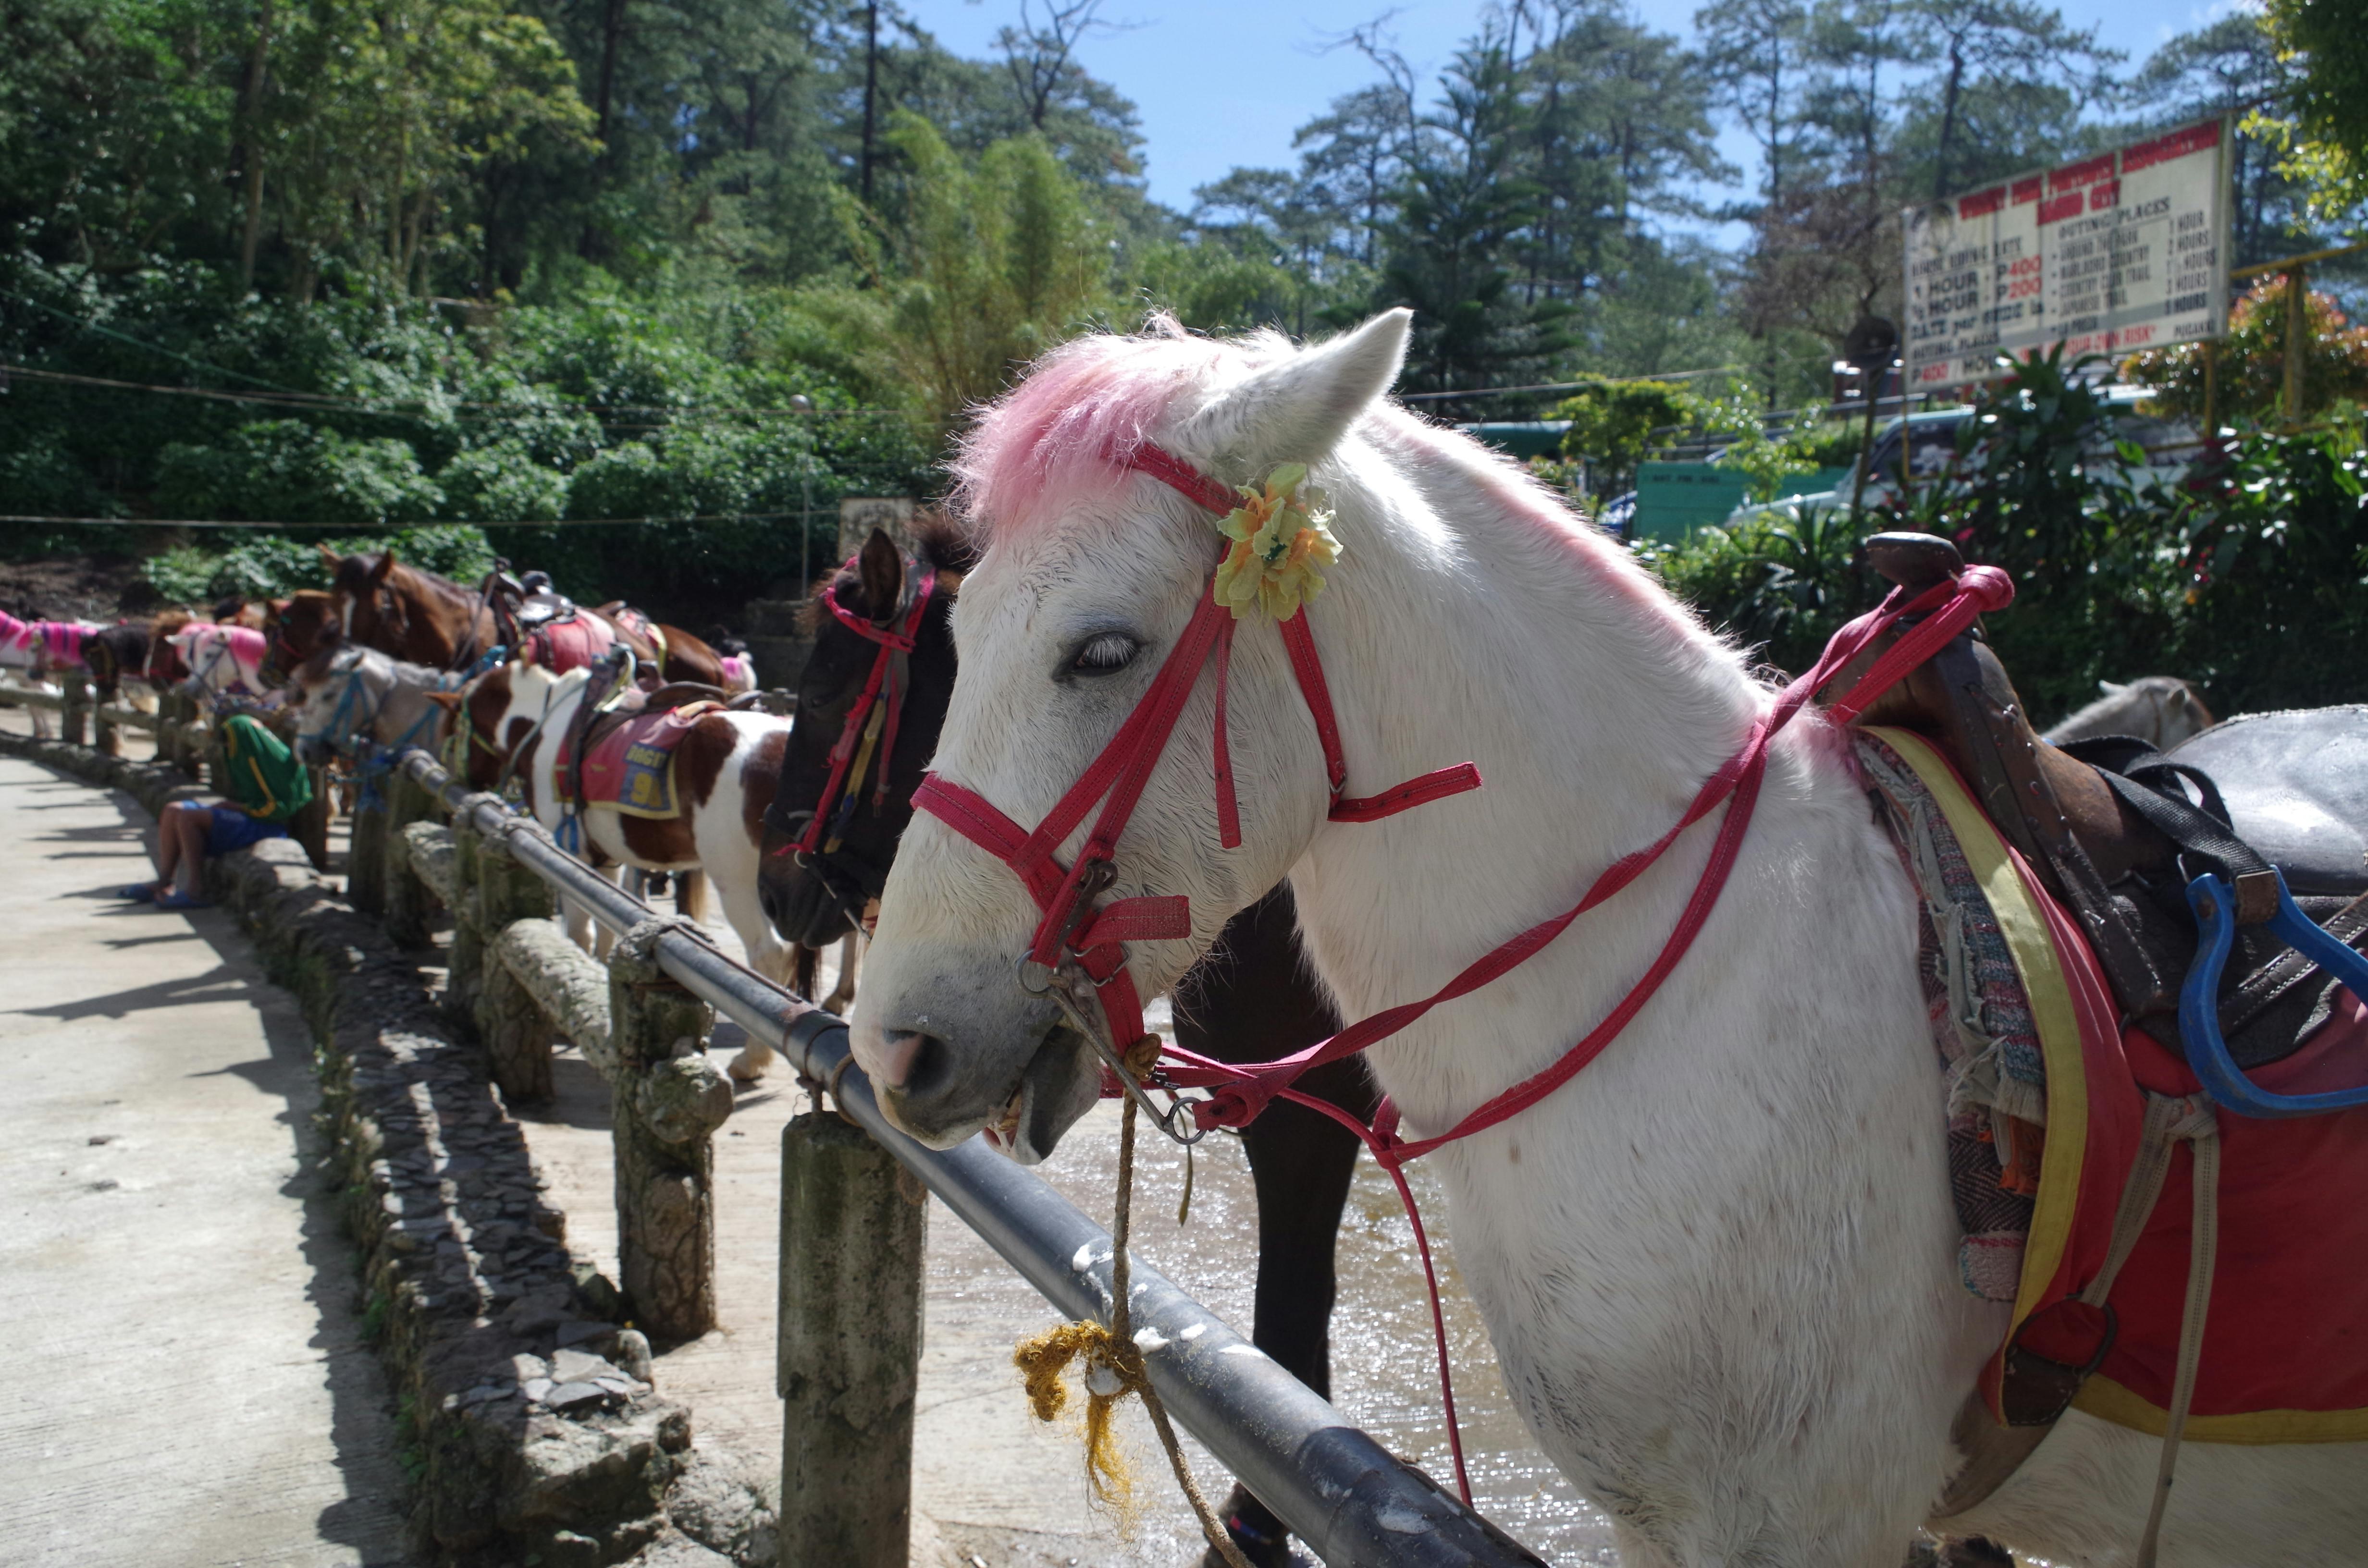 Horses lined up in Wright Park in Baguio